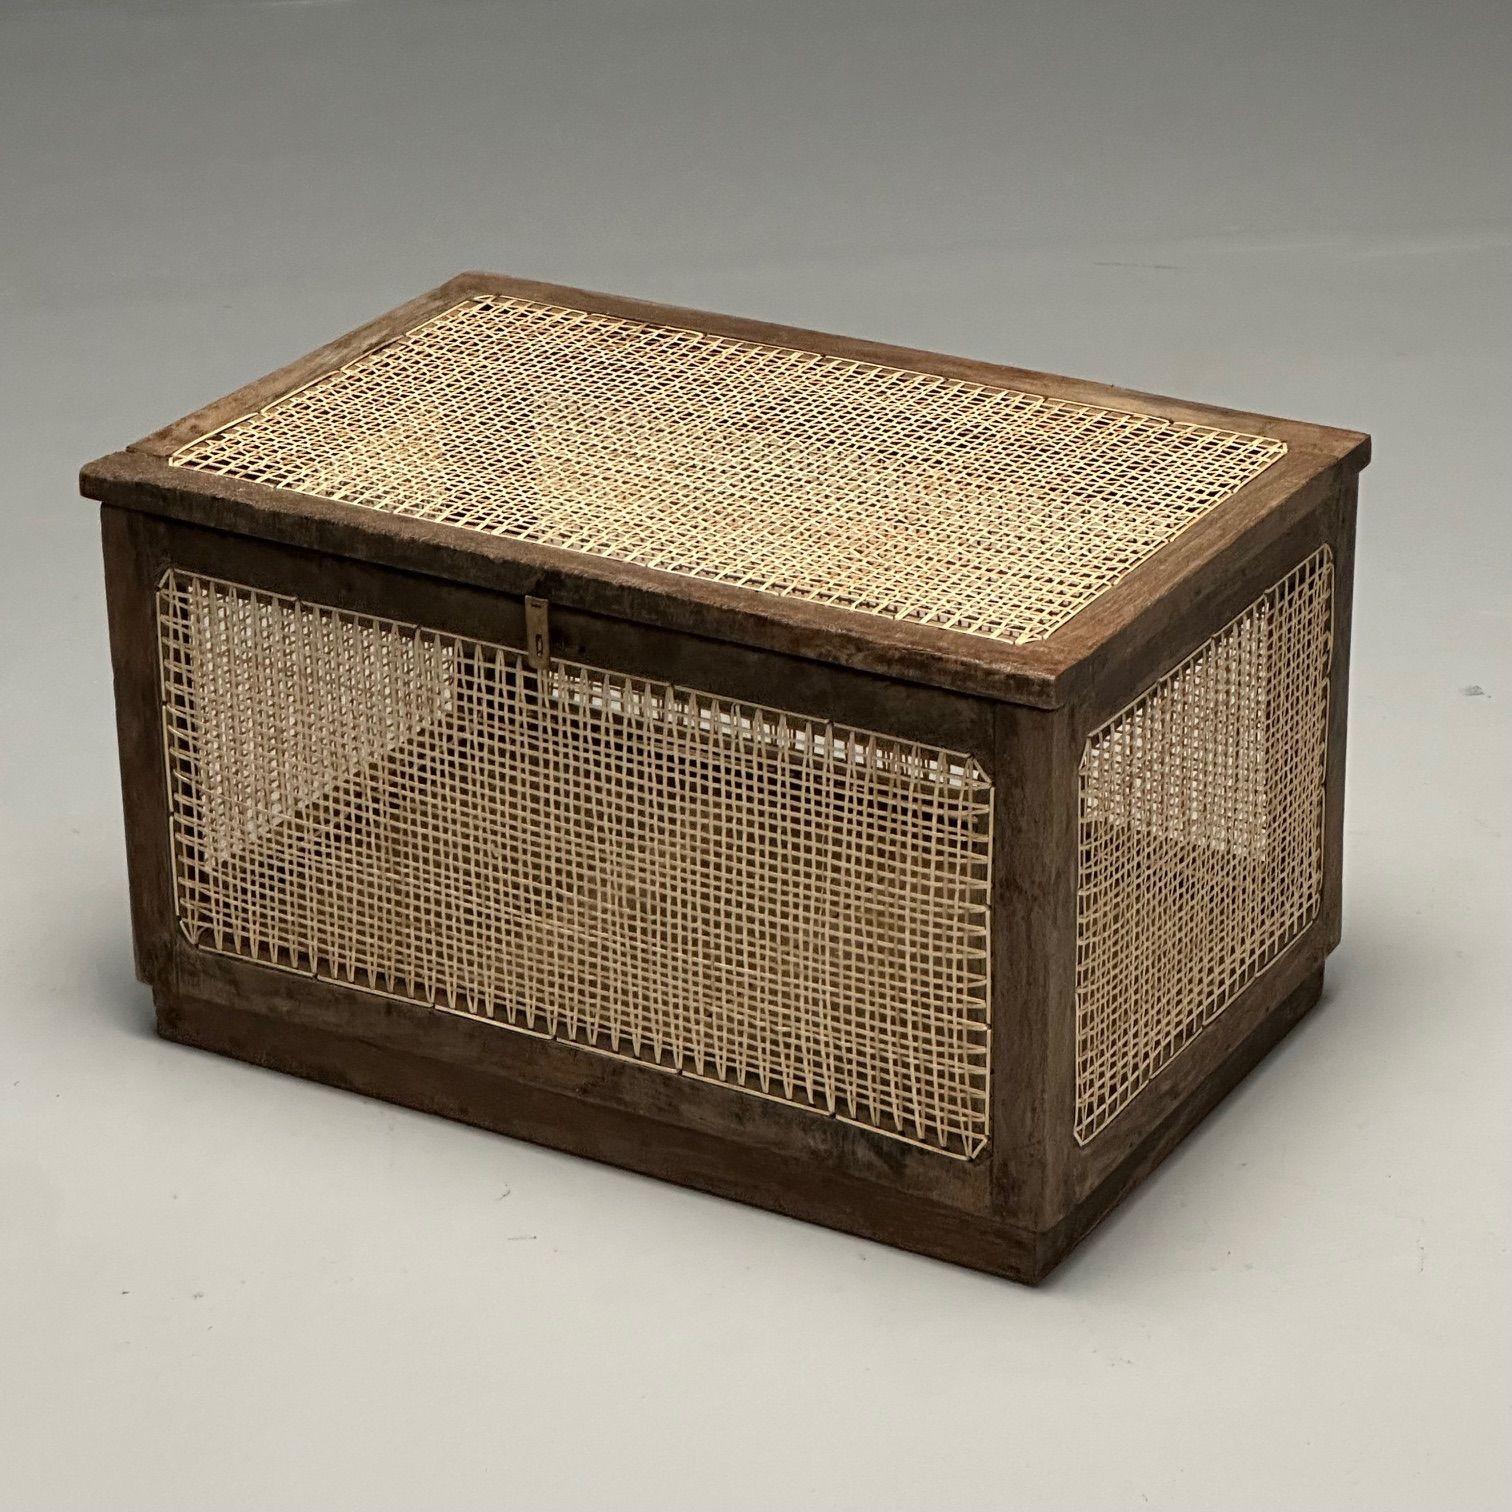 Pierre Jeanneret, French Mid-Century Modern, Dirty Linen Basket, Cane, Teak, Chandigarh, India c. 1960s

This item is directly from Chandigarh, India and has markings indicating provenance. The box has been lightly washed and very lightly polished.